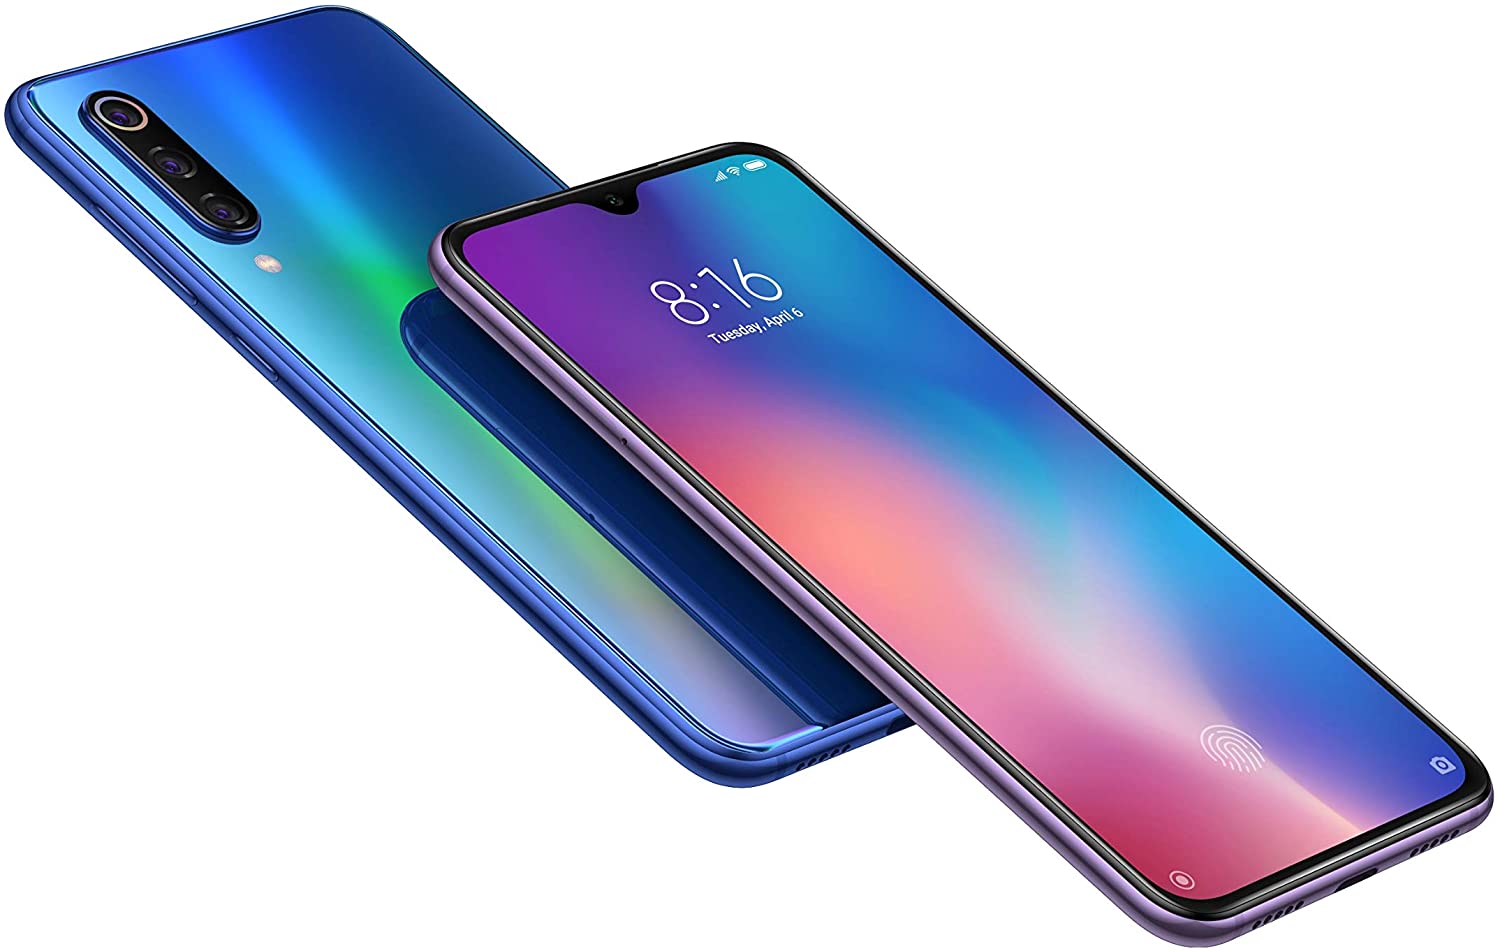 Xiaomi has rolled out Android 11 based MIUI 12.5 update for Mi 9 SE ‘Global’ variant